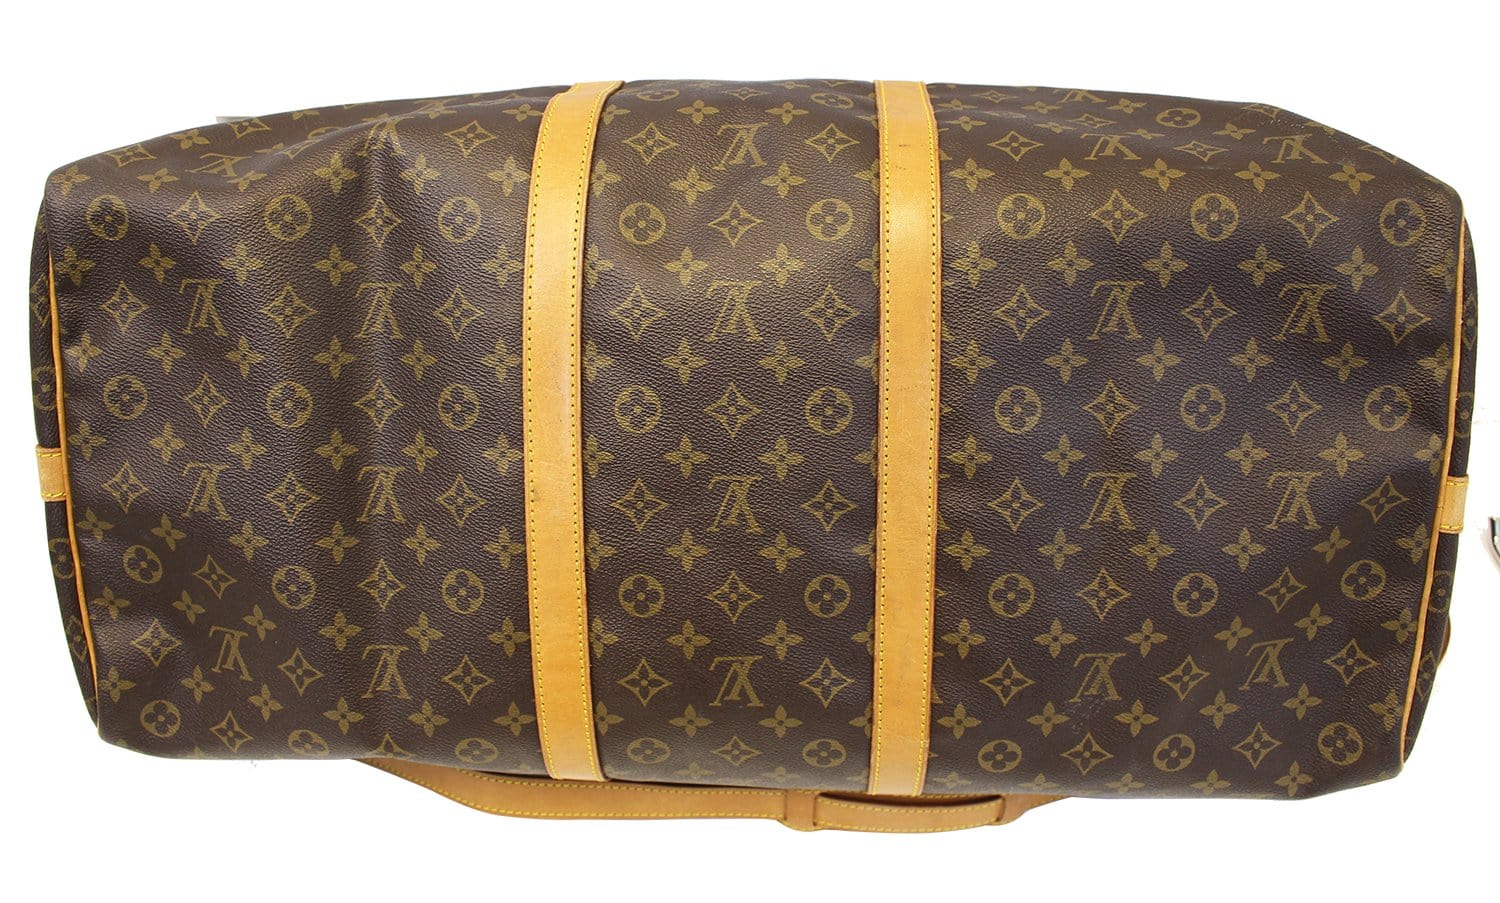 Louis Vuitton 1990 pre-owned Keepall Bandouliere 60 travel bag, Brown